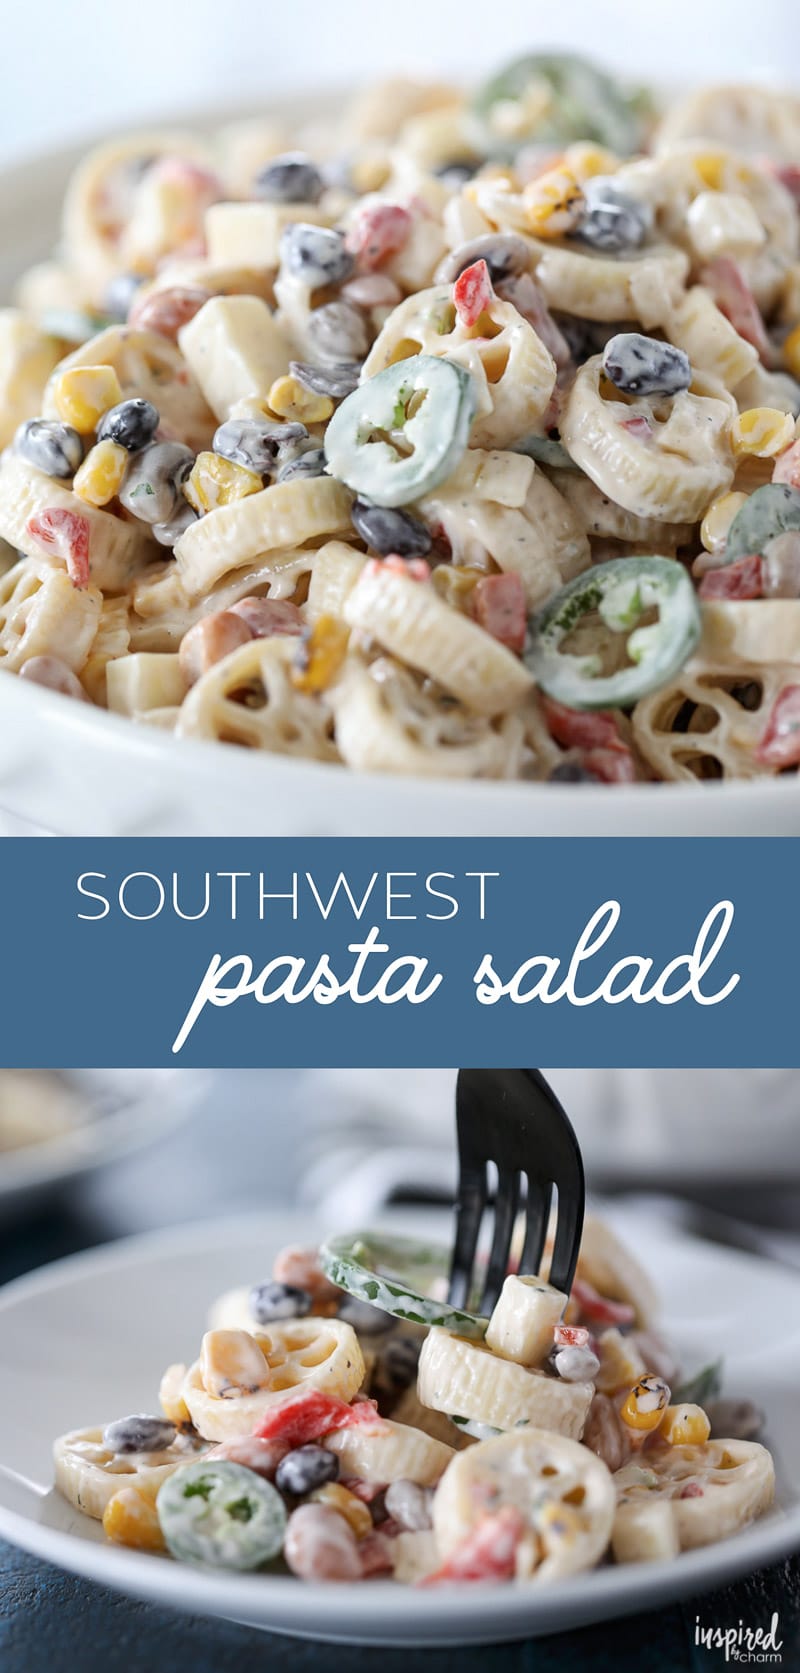 This Southwest Pasta Salad is a twist on the classic. Wagon wheel pasta tossed with corn, beans, roasted red peppers, and creamy ranch dressing creates a flavor combination you and your guests will love.